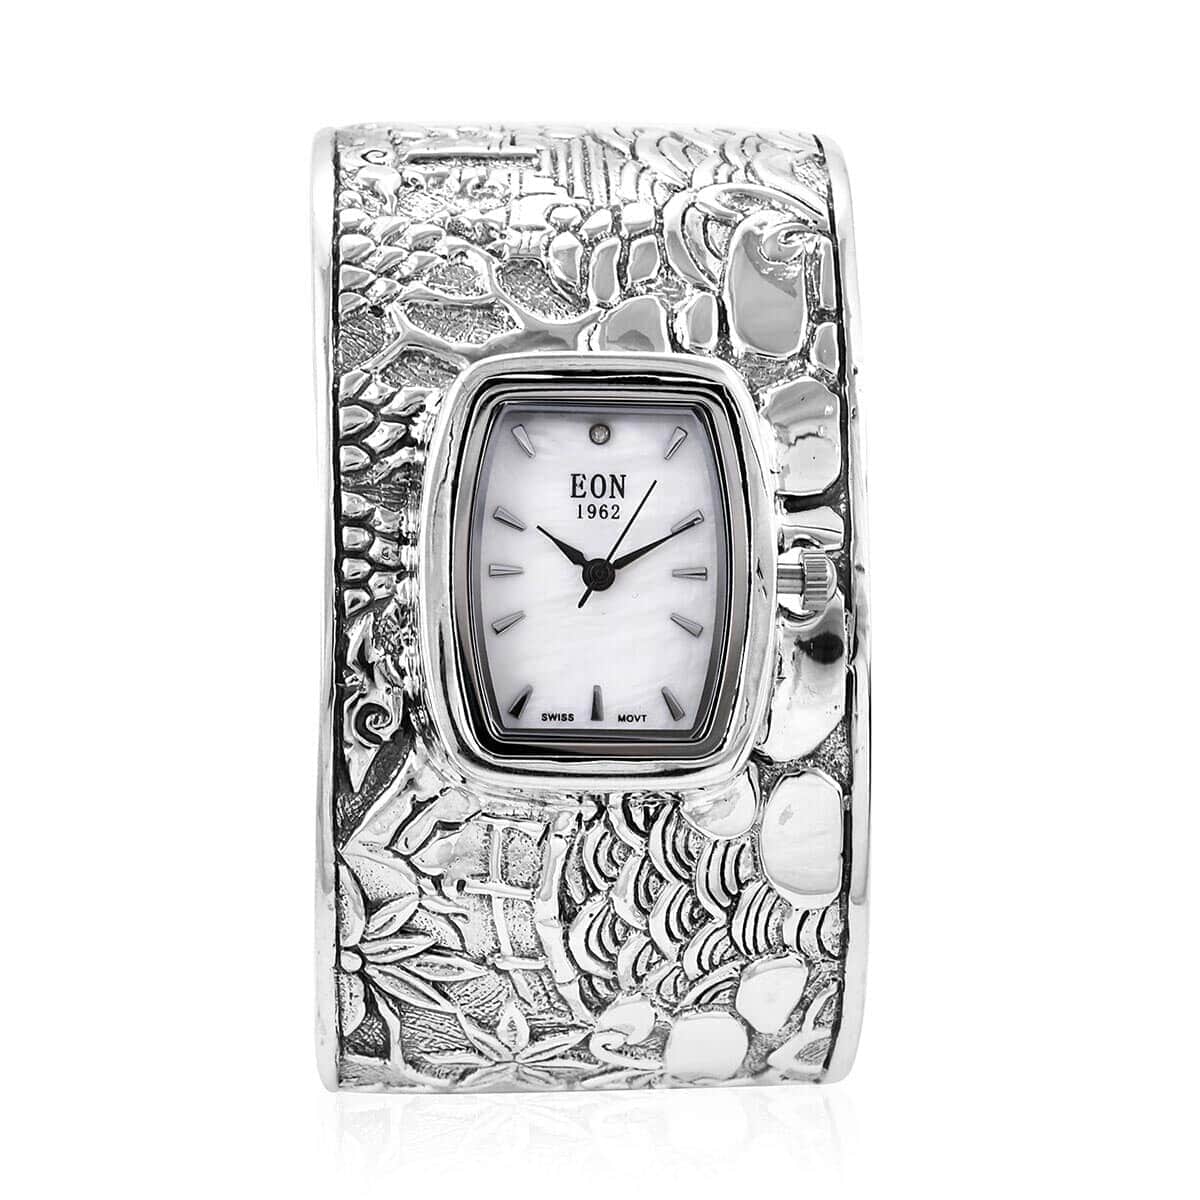 BALI LEGACY EON 1962 Swiss Movement Cuff Bracelet Watch in Sterling Silver with Stainless Steel Back , Designer Bracelet Watch , Analog Luxury Wristwatch image number 0